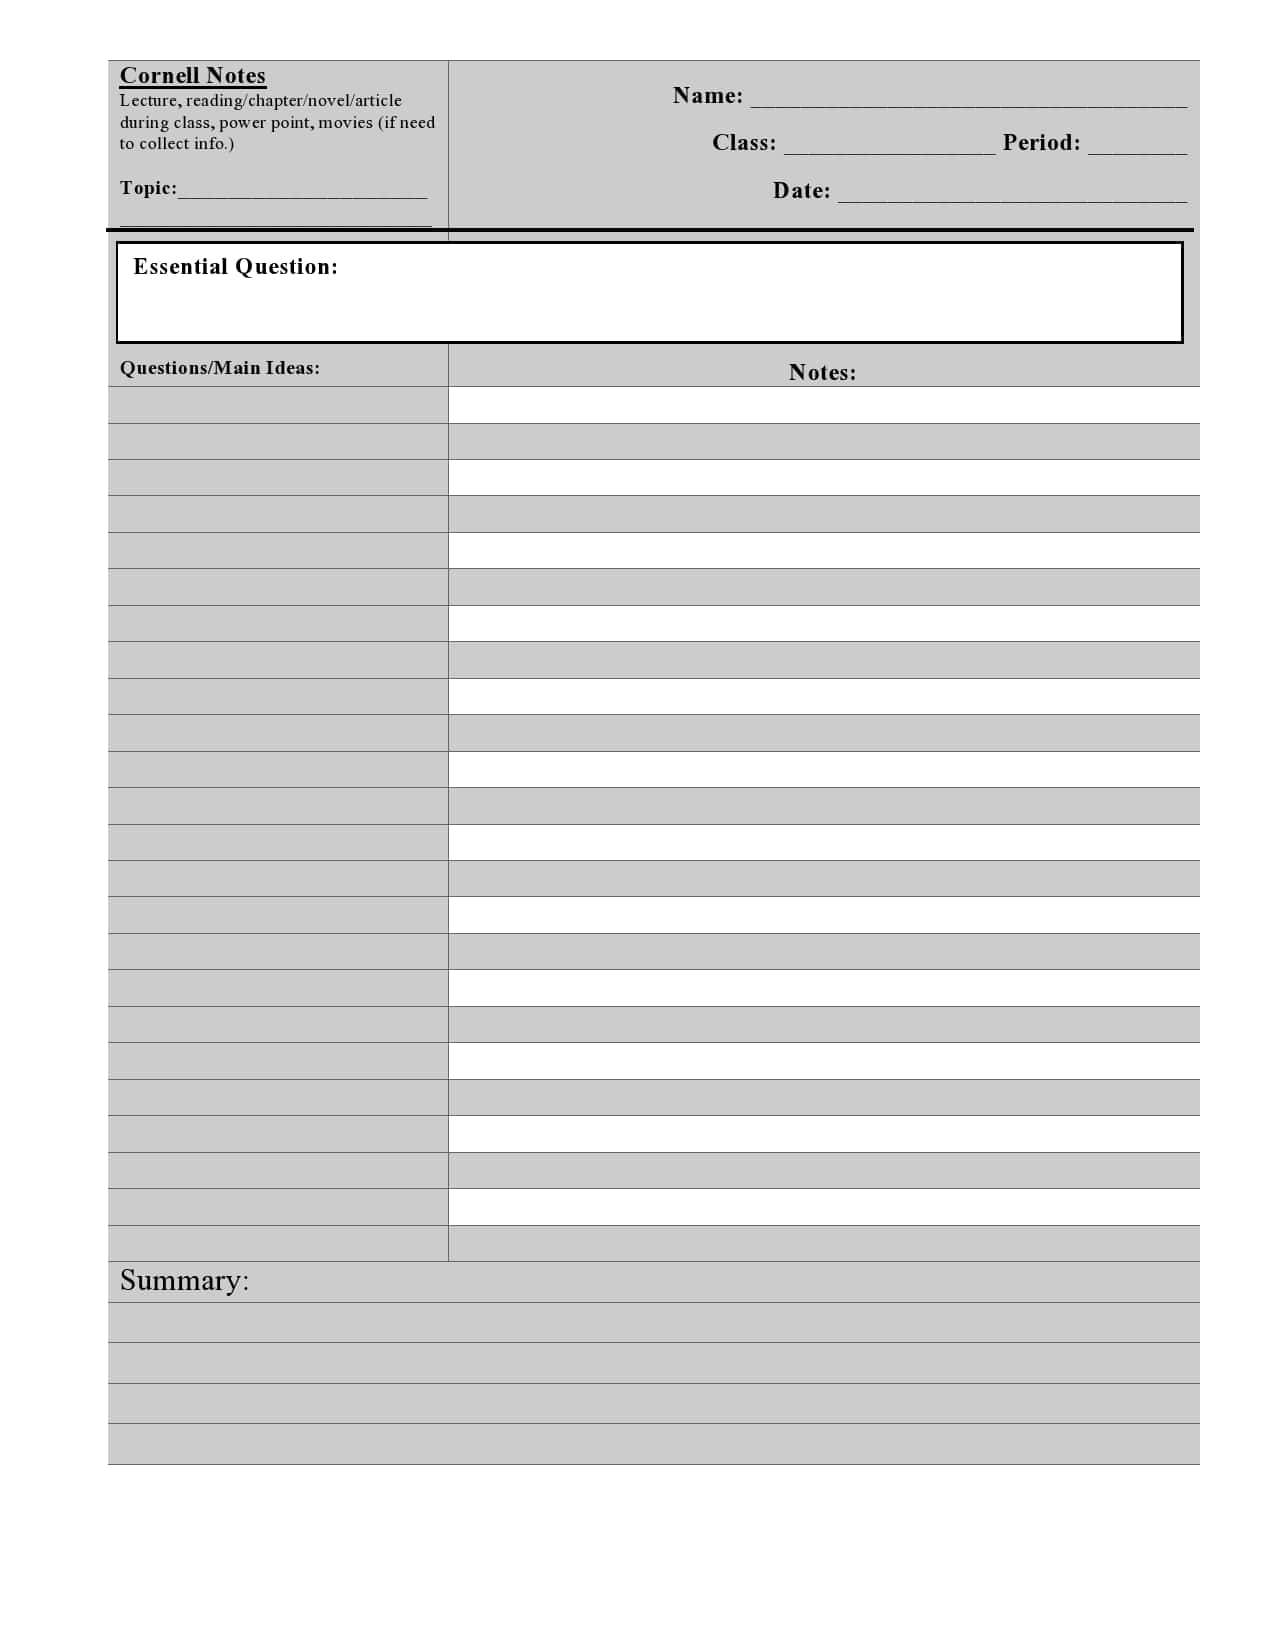 22 Printable Cornell Notes Templates [Free] - TemplateArchive For Best Note Taking Template